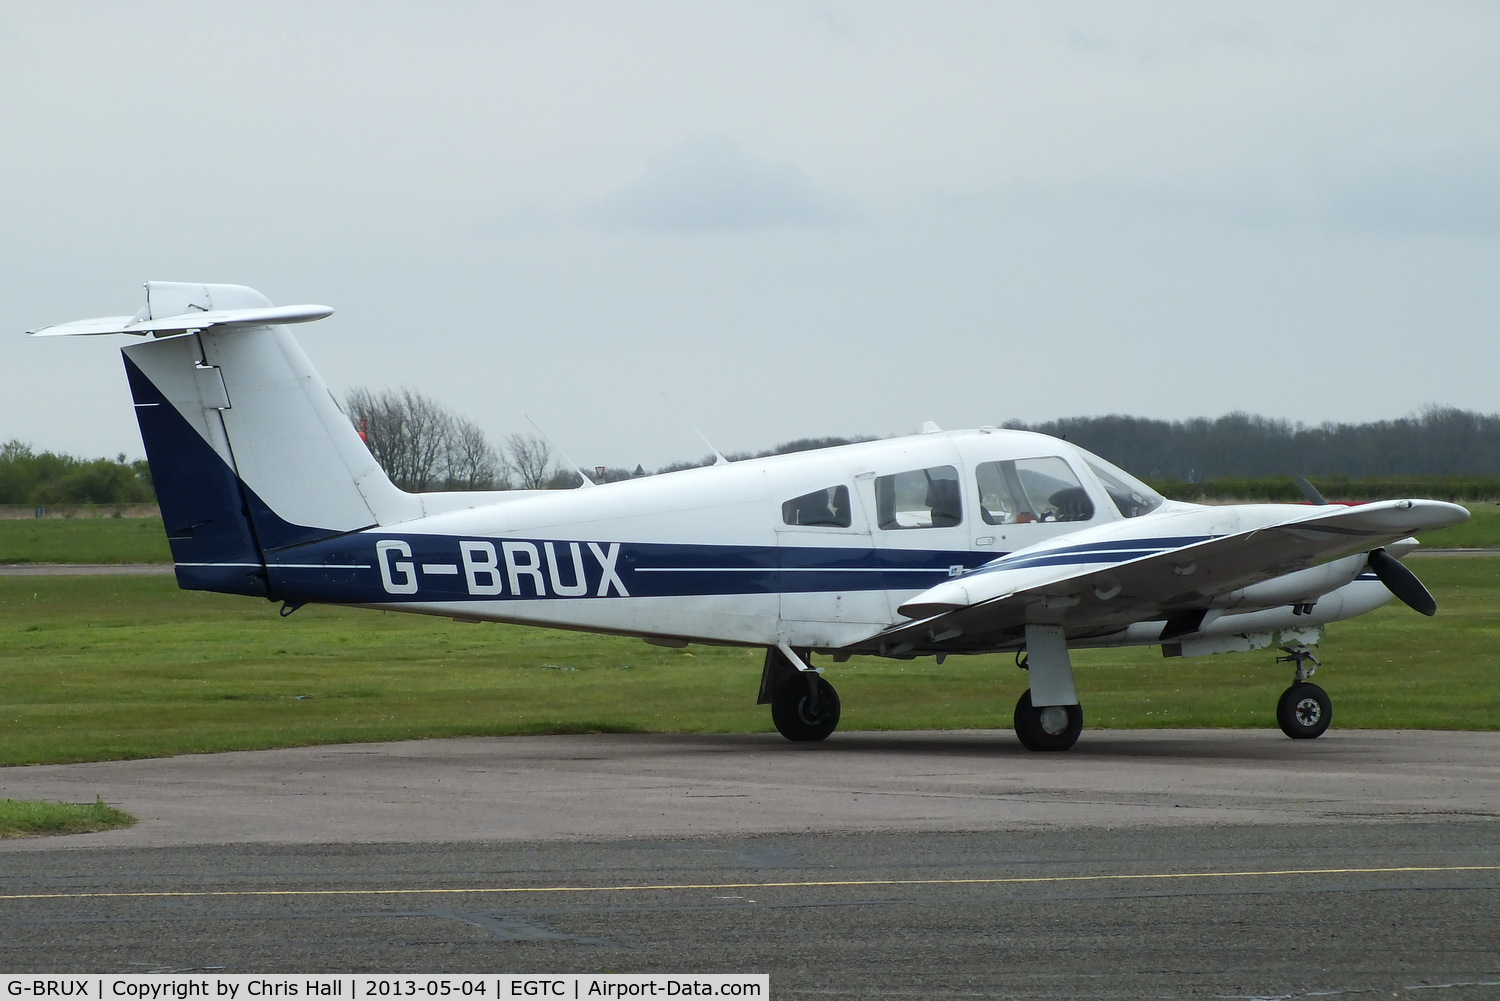 G-BRUX, 1978 Piper PA-44-180 Seminole C/N 44-7995151, privately owned